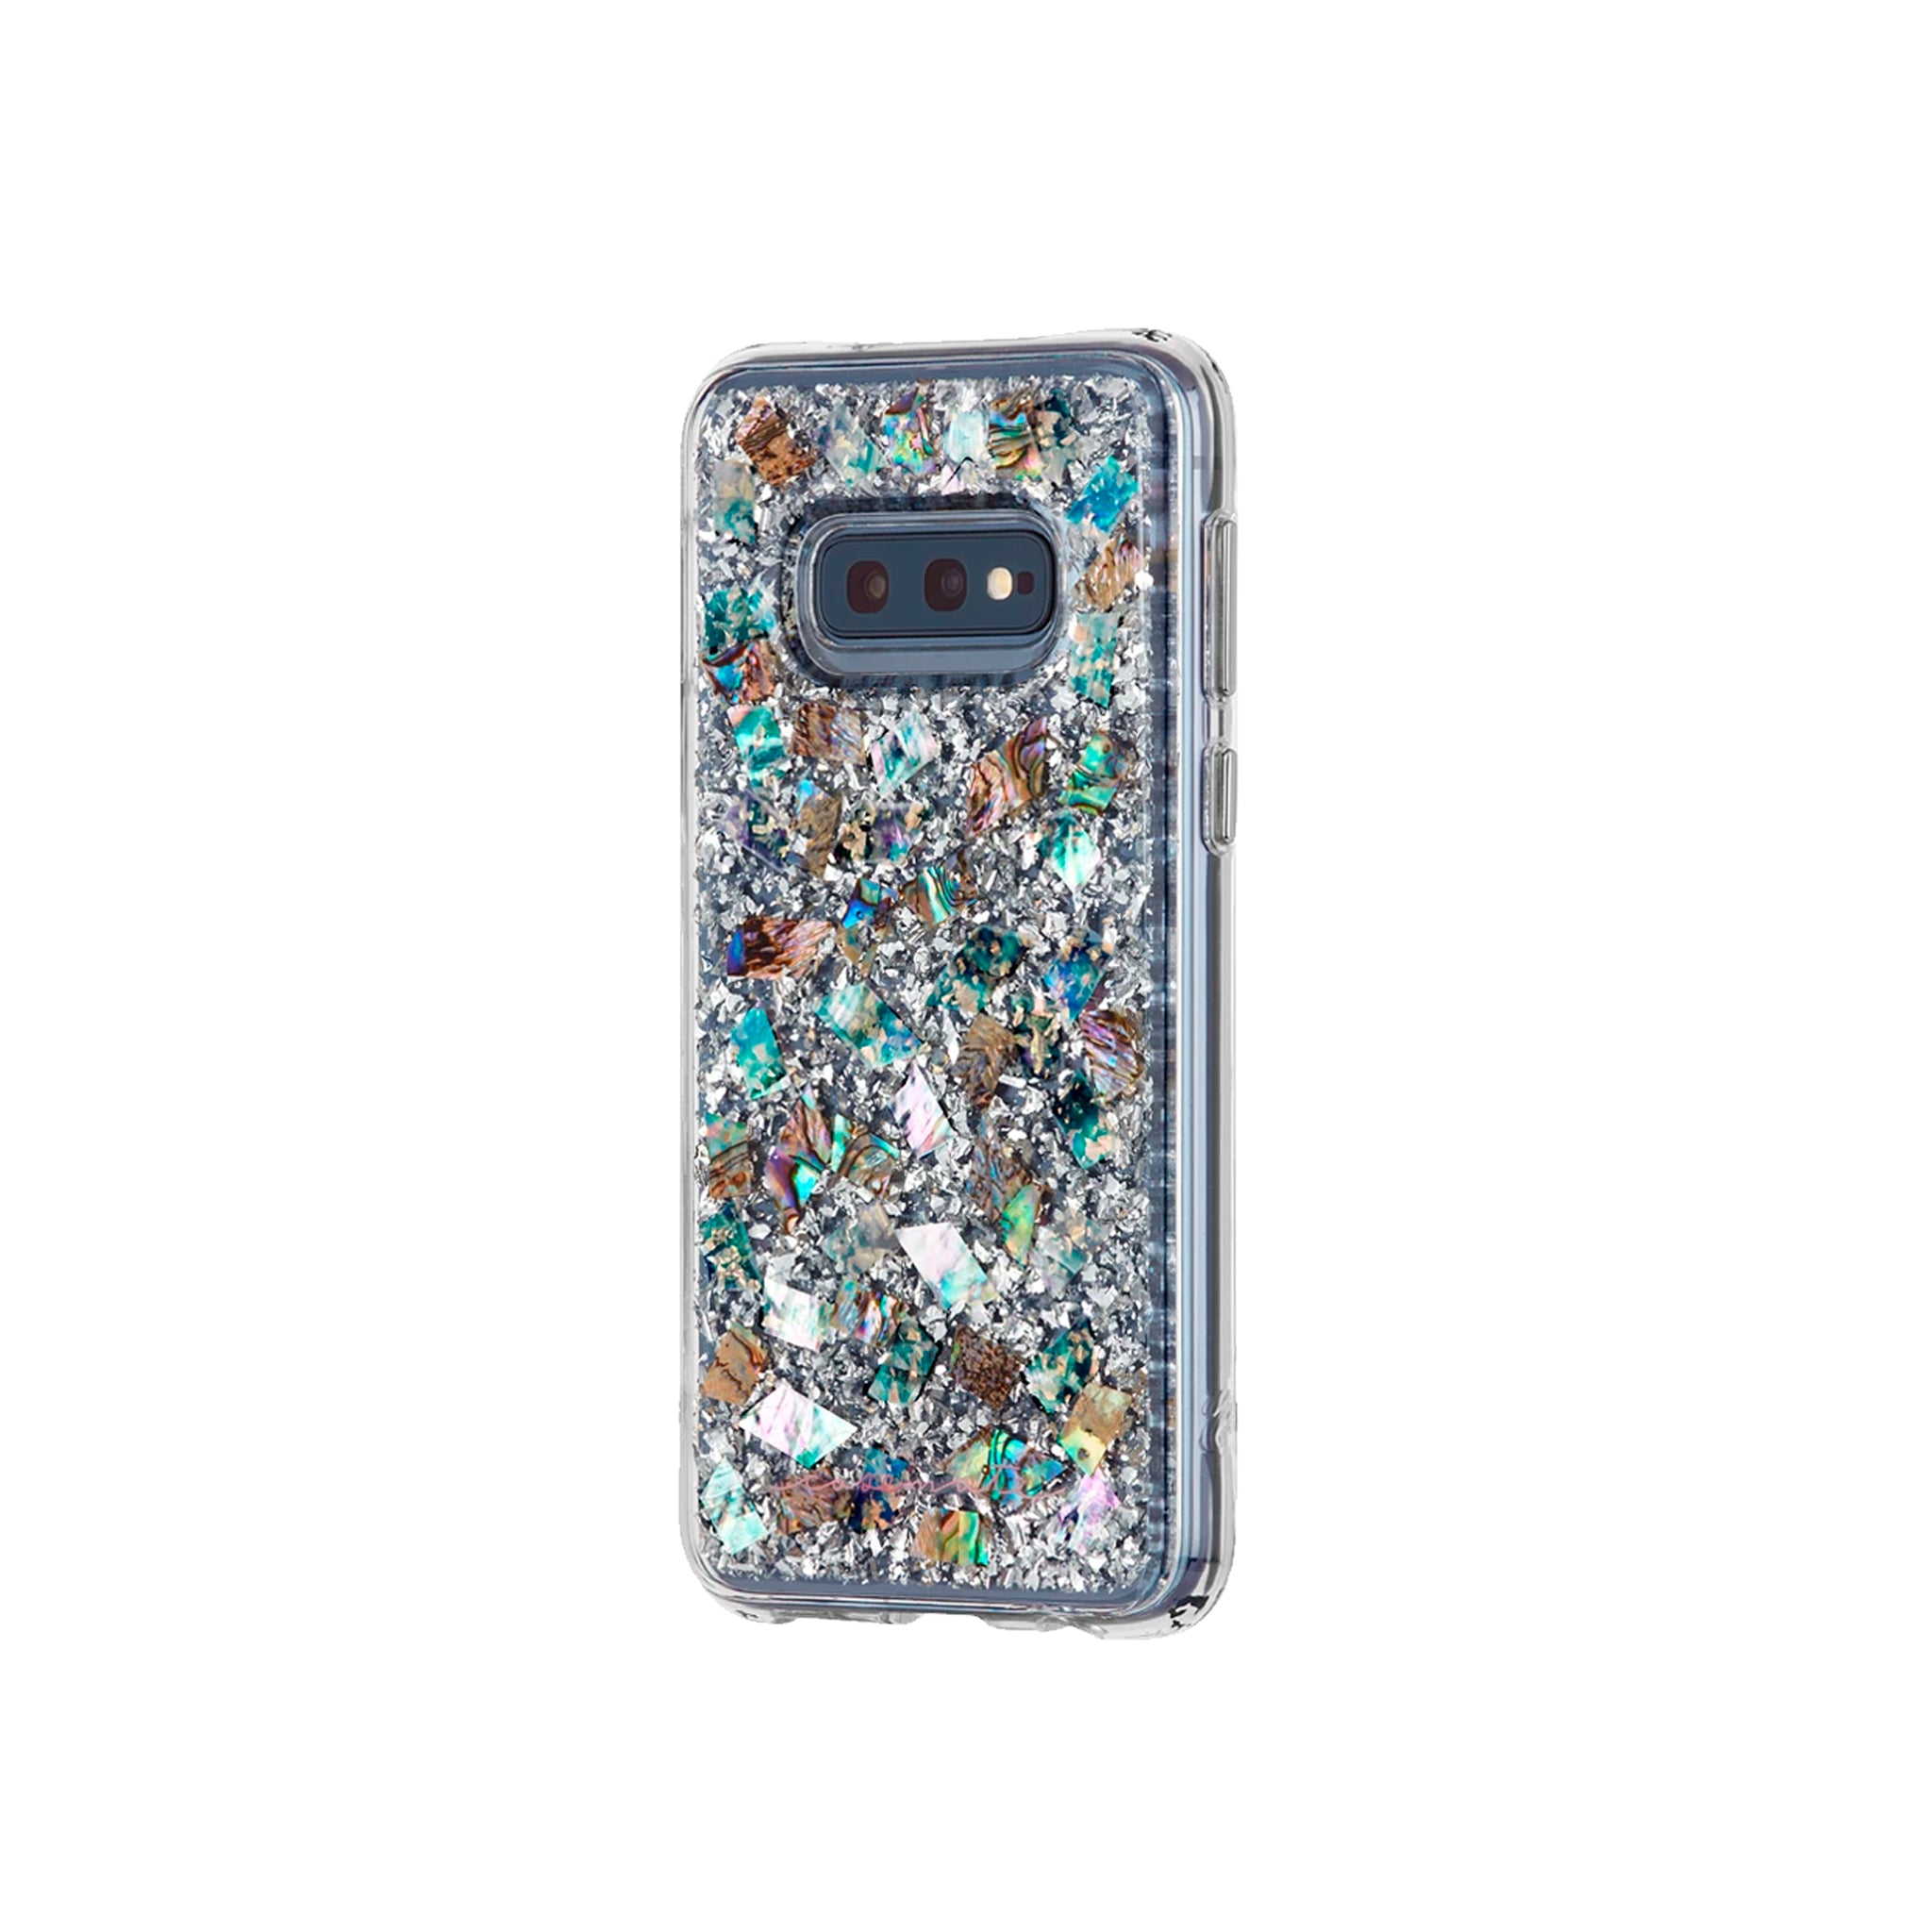 Case-mate - Karat Case For Samsung Galaxy S10e - Mother Of Pearl